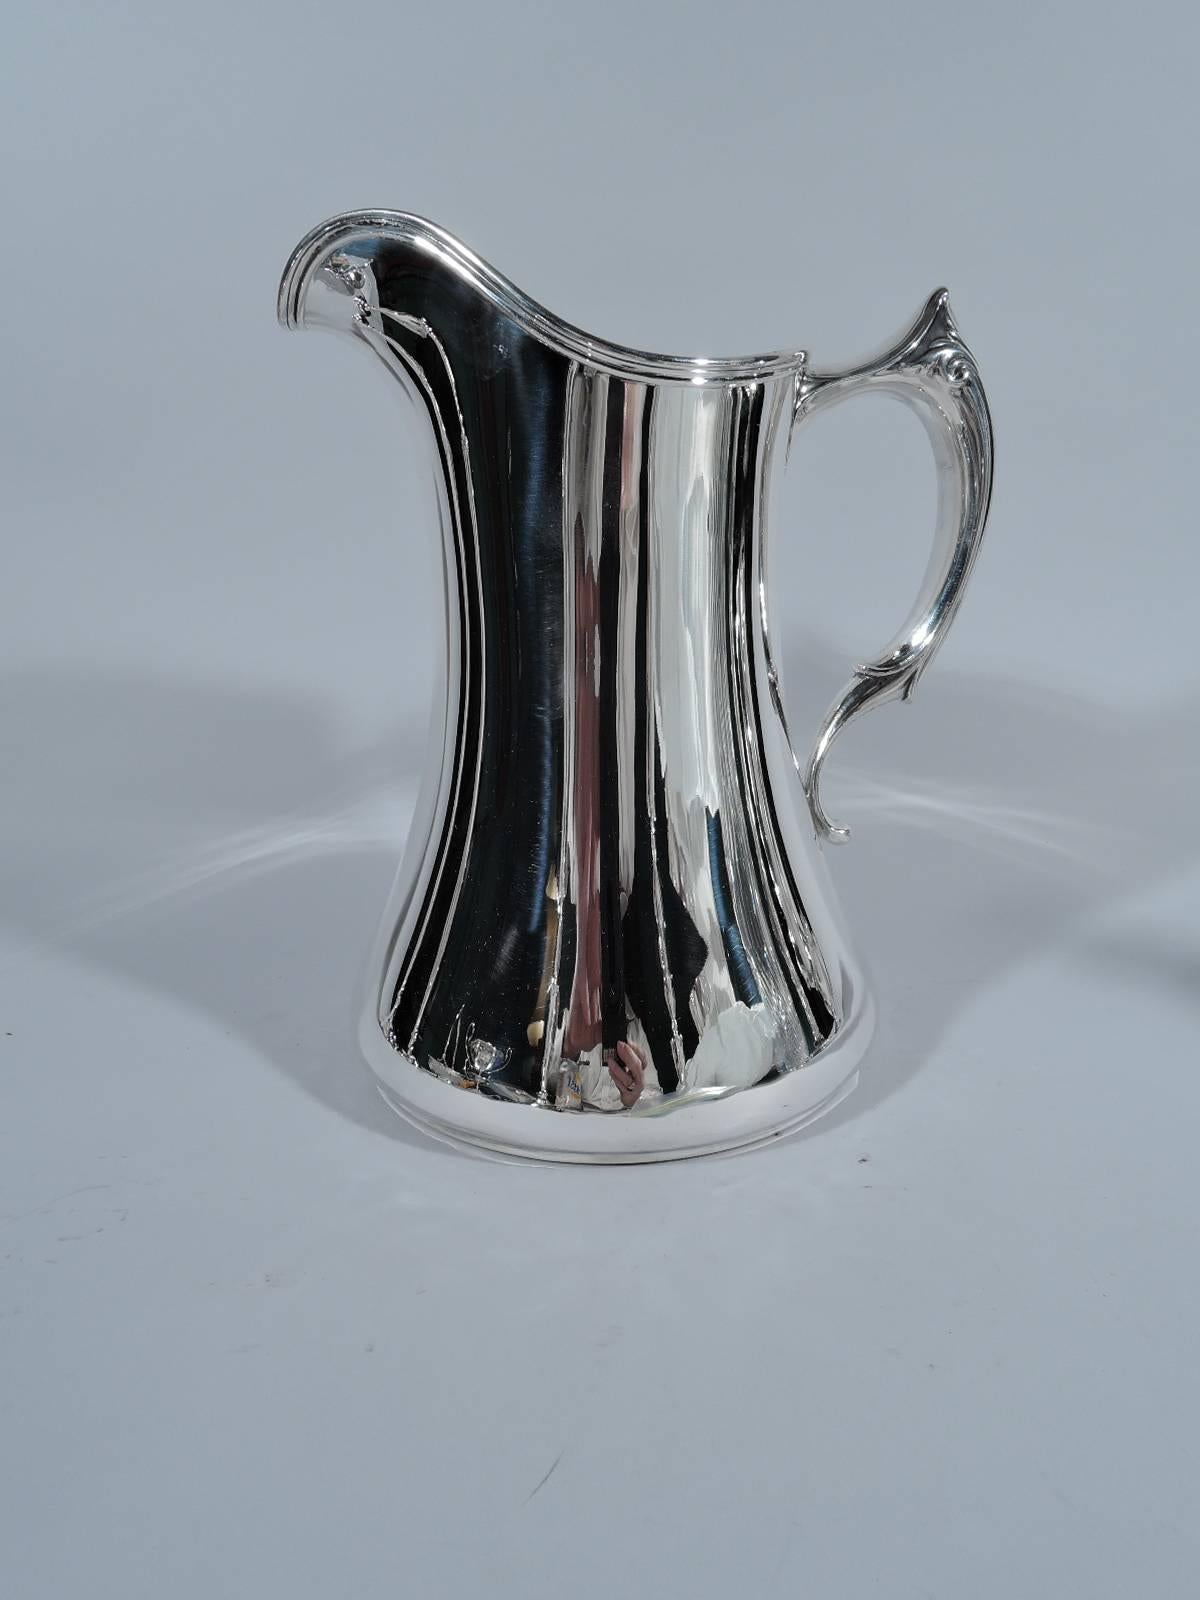 Stylish Edwardian sterling silver water pitcher. Made by Whiting in New York in 1906. Wide base and molded helmet mouth. Spare and functional with the fancy part limited to the feathery scrollwork that appears to melt into the handle. Hallmark